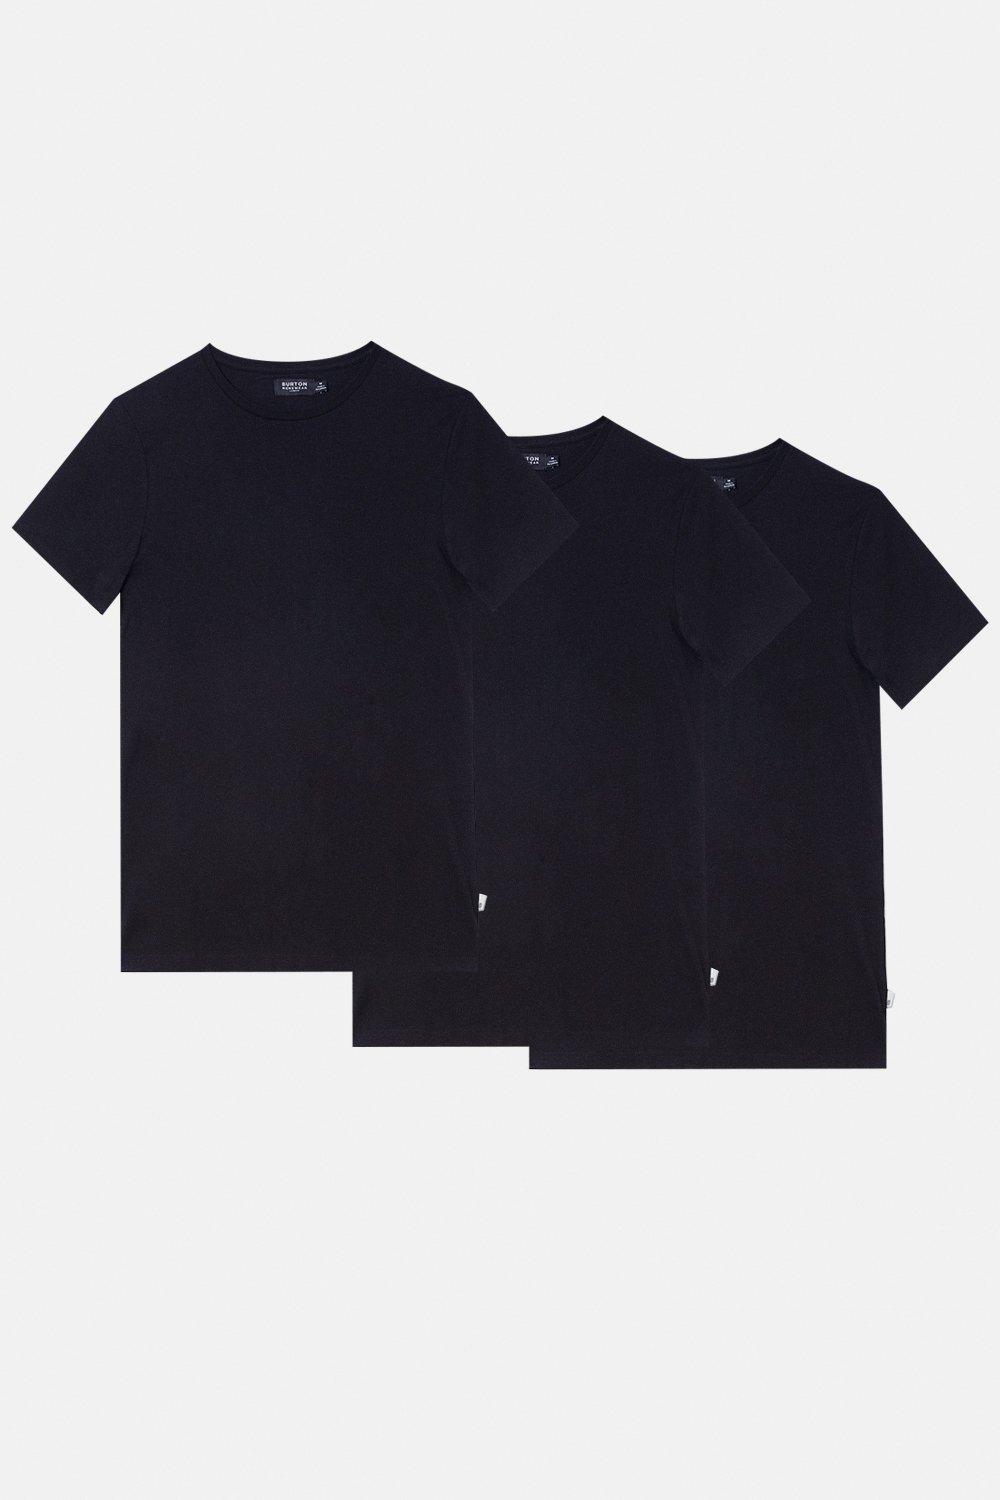 Mens 3 Pack Navy Muscle Fit Crew Neck T-shirts